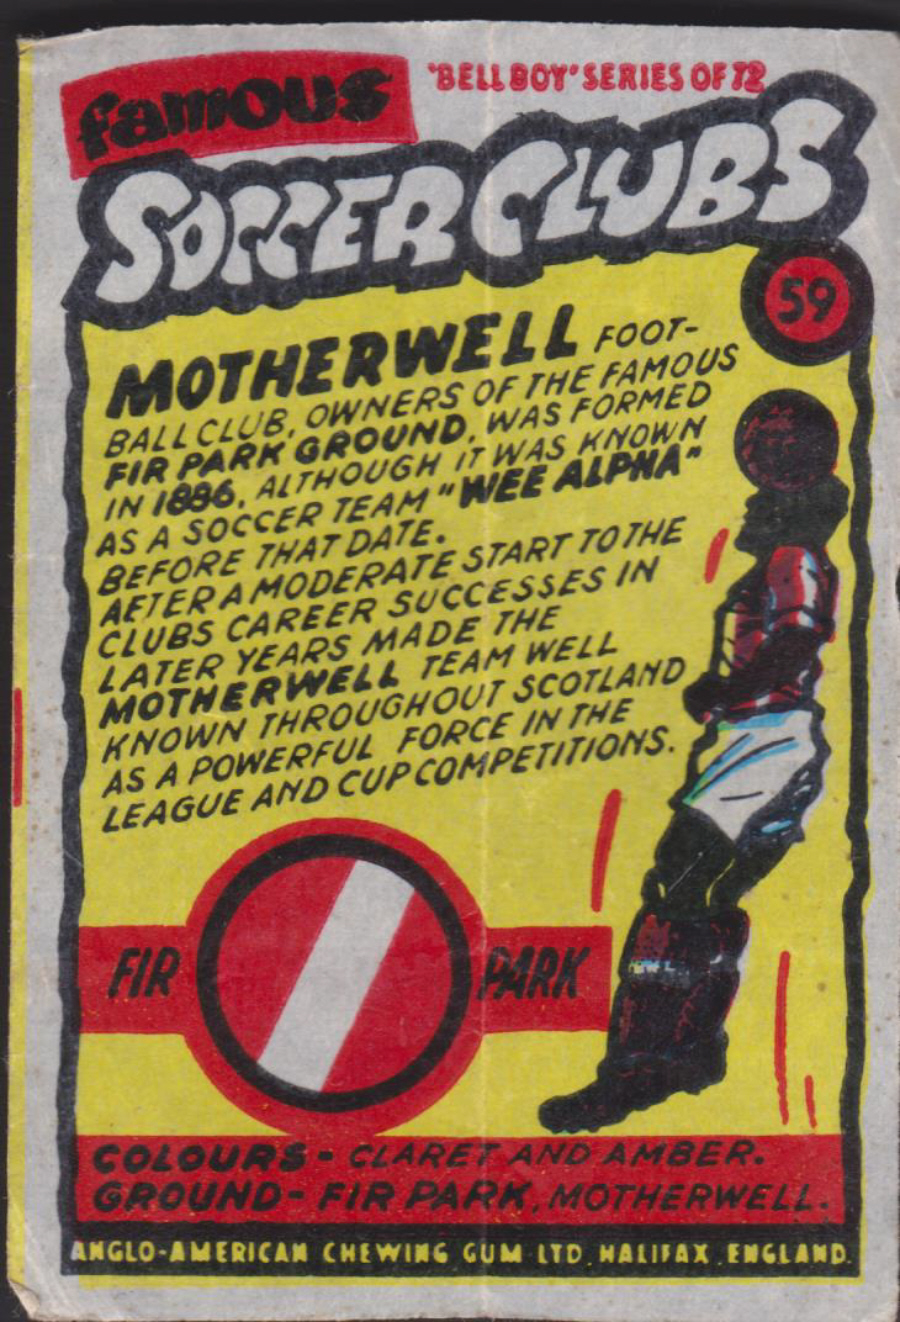 Anglo-American-Chewing-Gum-Wax-Wrapper-Famous-Soccer-Clubs-No-59 -Motherwell - Click Image to Close